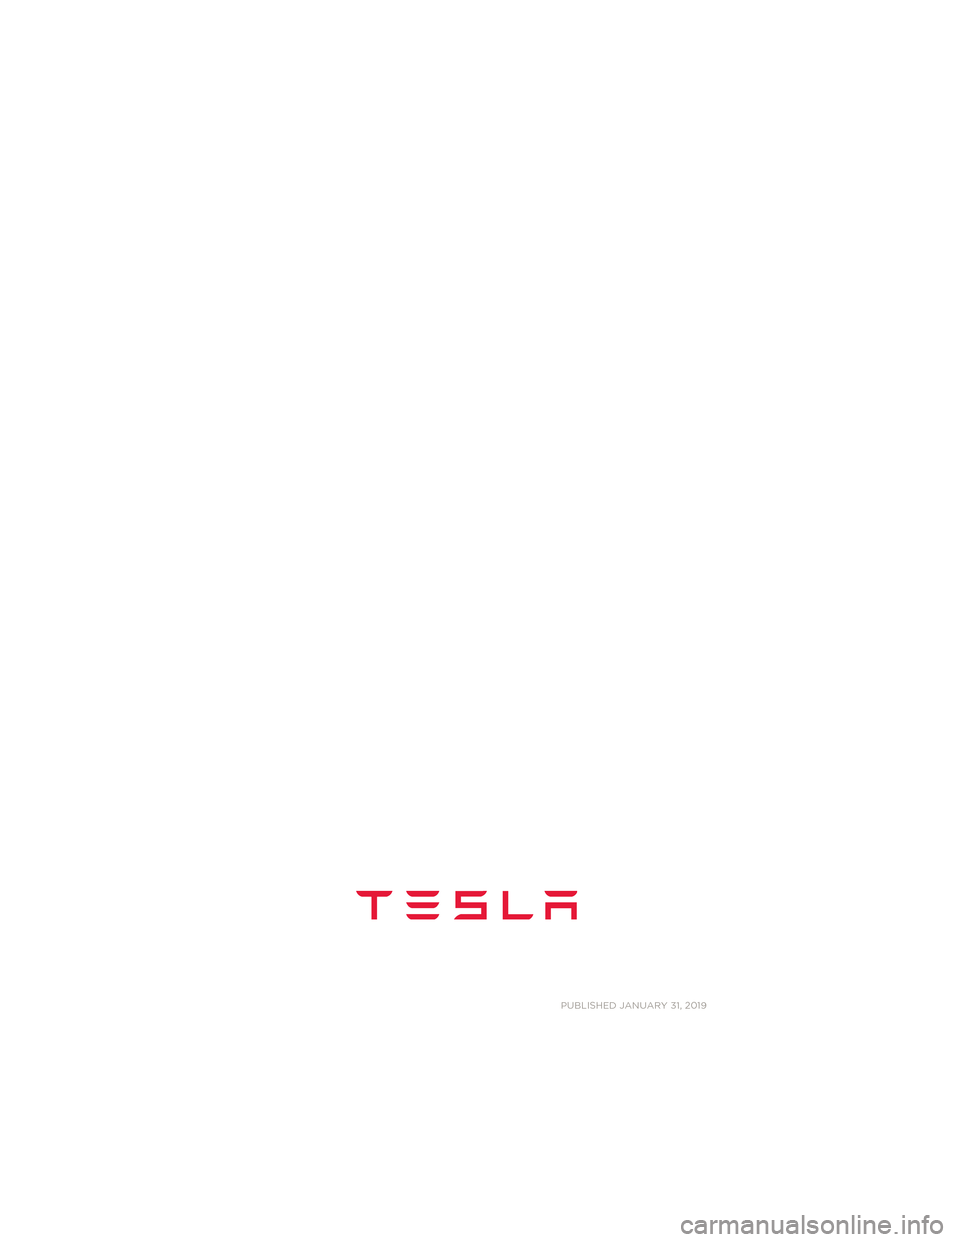 TESLA MODEL 3 2019  Ägarmanual (in Swedish) PUBLISHED JANUARY 31, 2019
Model S Quick Guide - NA Rev C.book  Page
 2  Wednesday, December 18, 2013  12:40 PM 